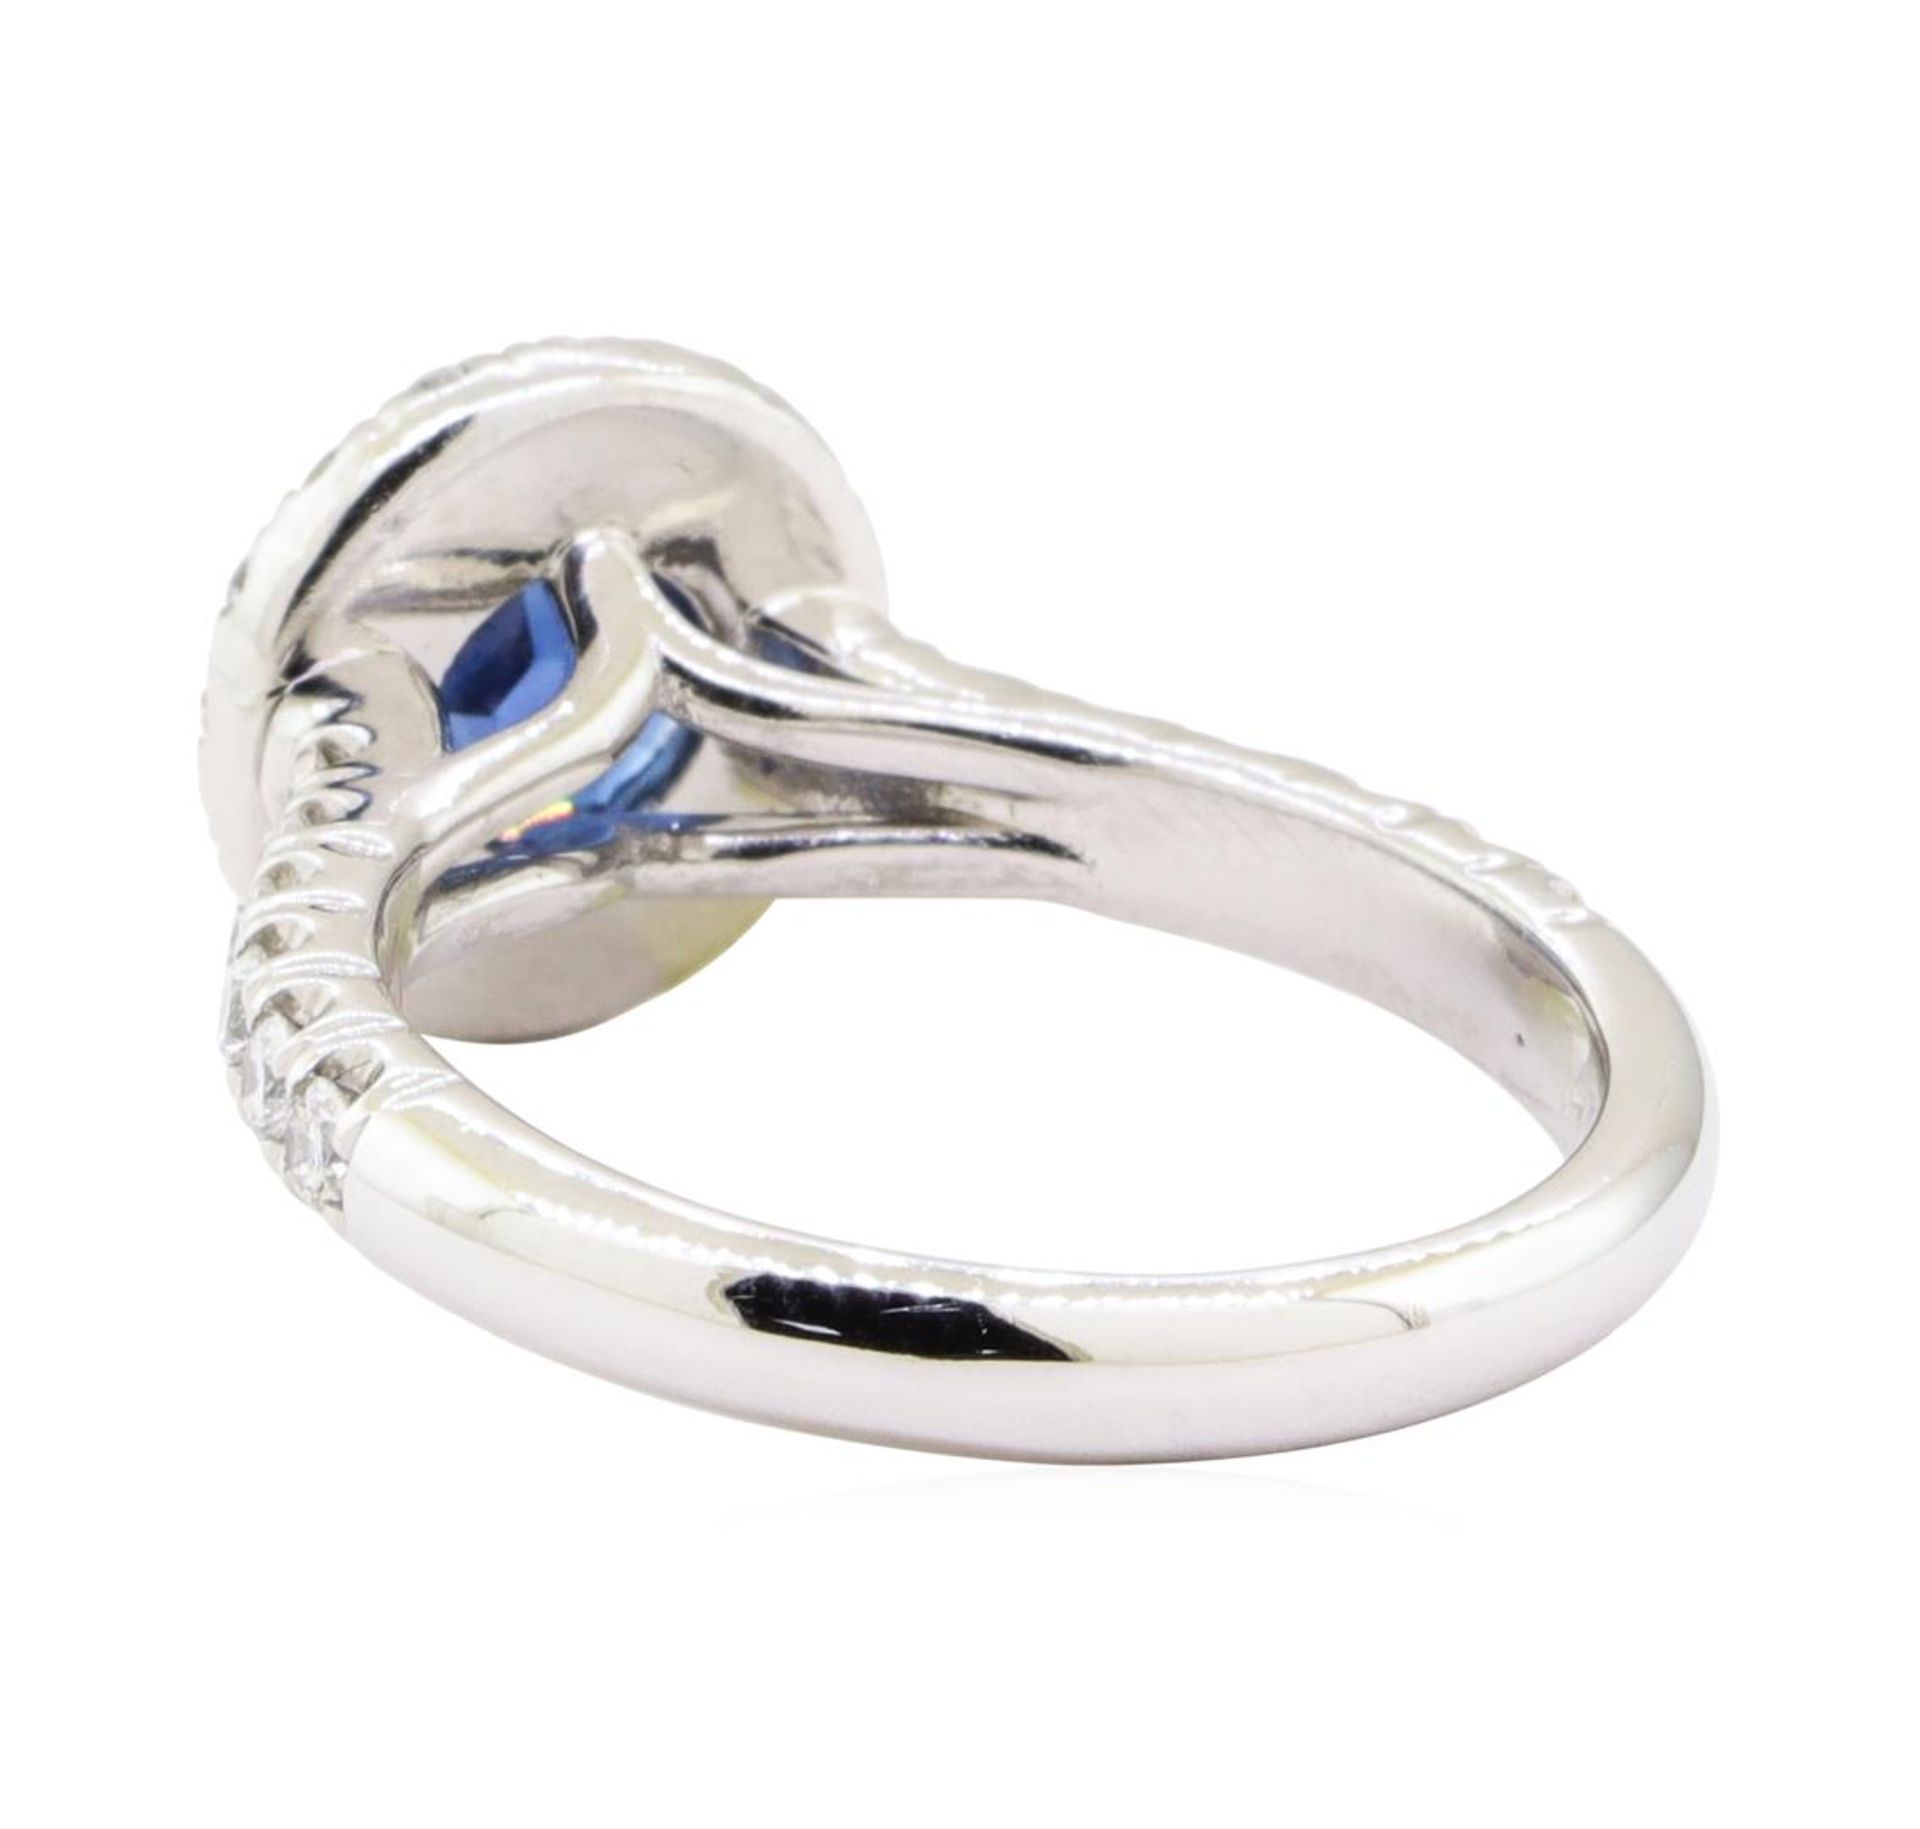 1.42 ctw Sapphire And Diamond Ring - 14KT White Gold - Image 6 of 10